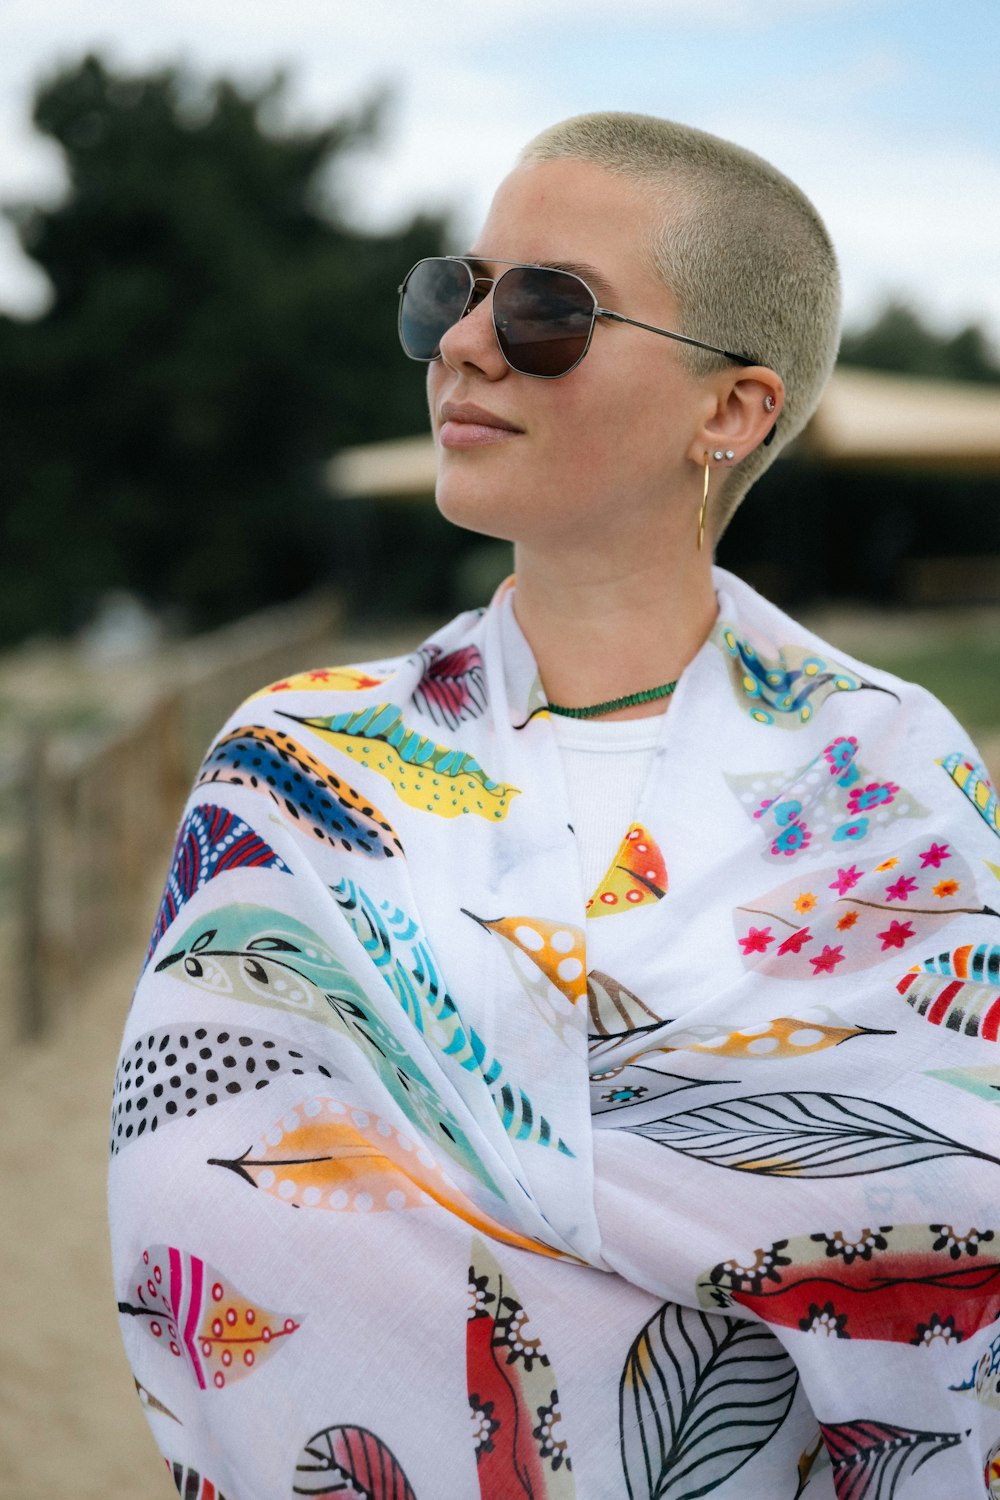 a woman with a shaved head wearing sunglasses